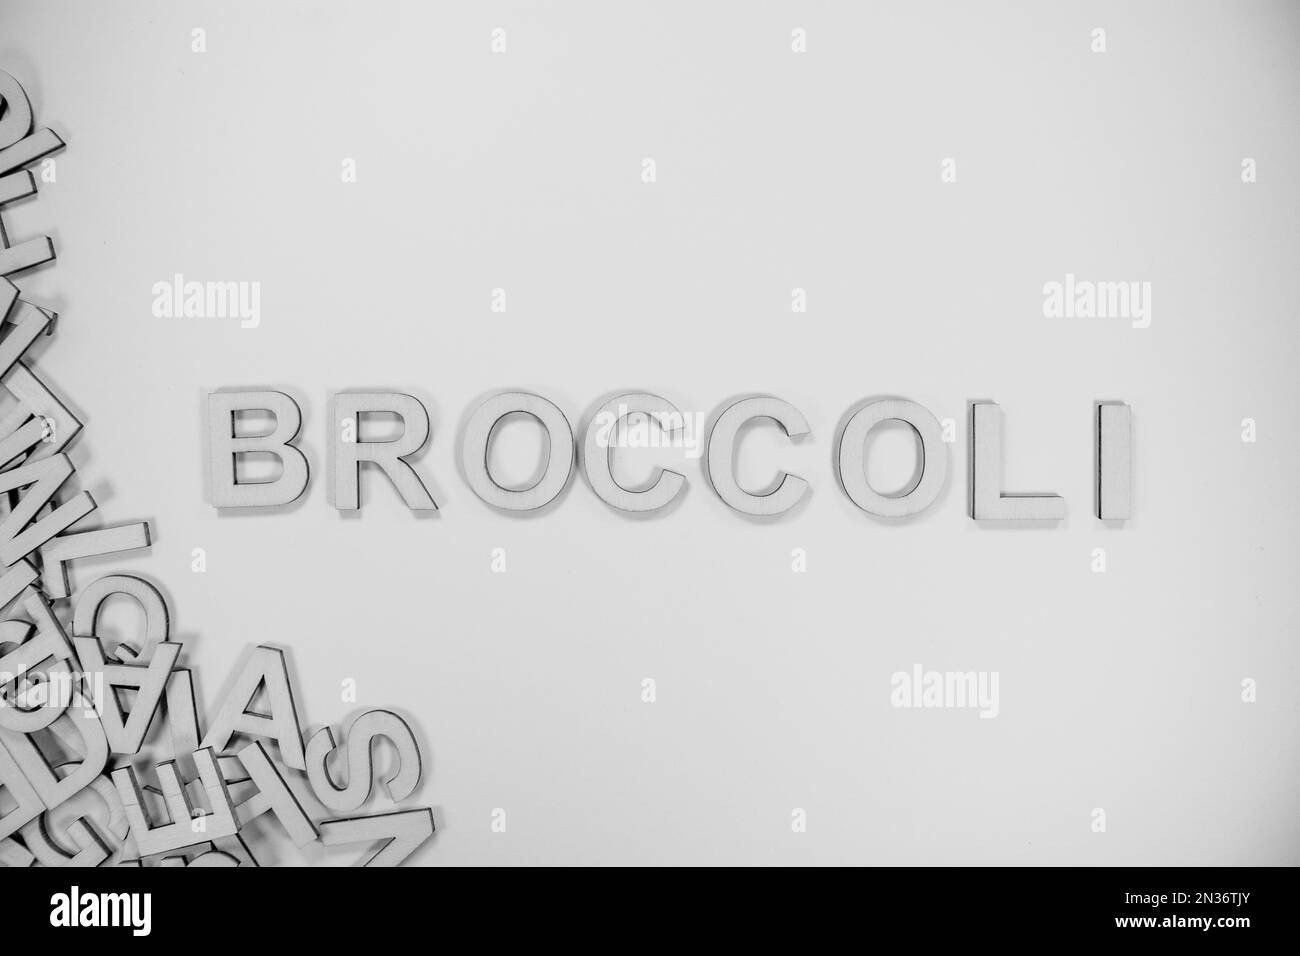 BROCCOLI in wooden English words language capital letters spilling from a pile of letters in black and white Stock Photo